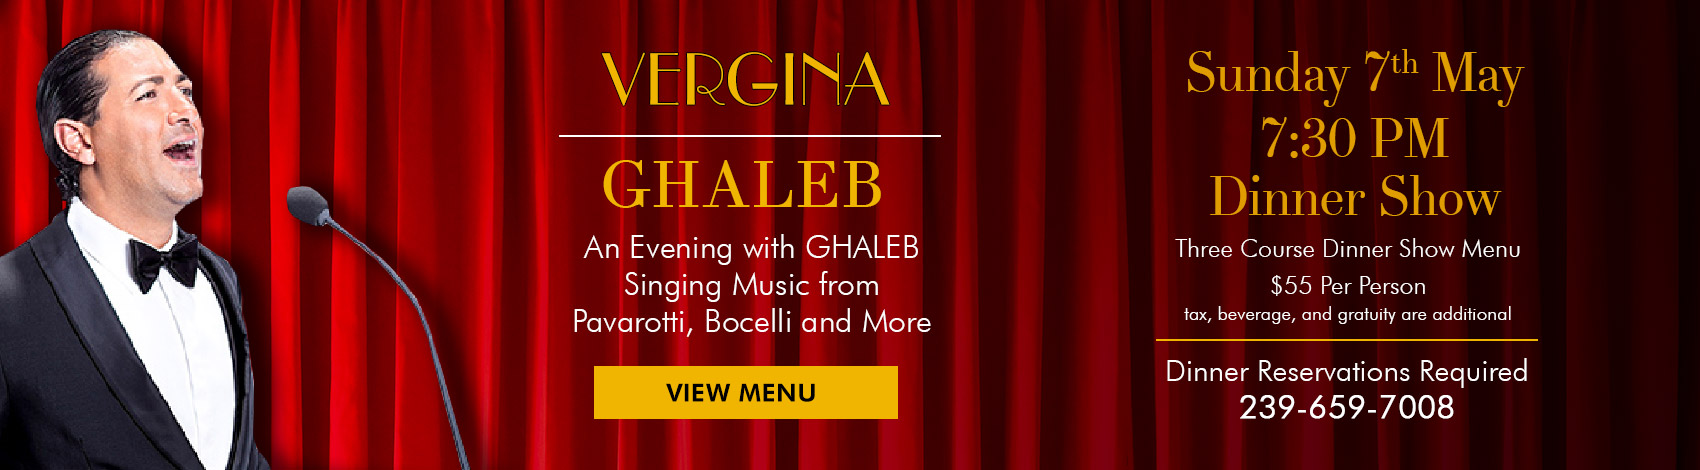 An Evening with GHALEB Singing Music from Pavarotti, Bocelli and More May 7th 7:30 PM Dinner Show Three Course Dinner Show Menu $55 Per Person, tax, beverage, and gratuity are additional - View Menu